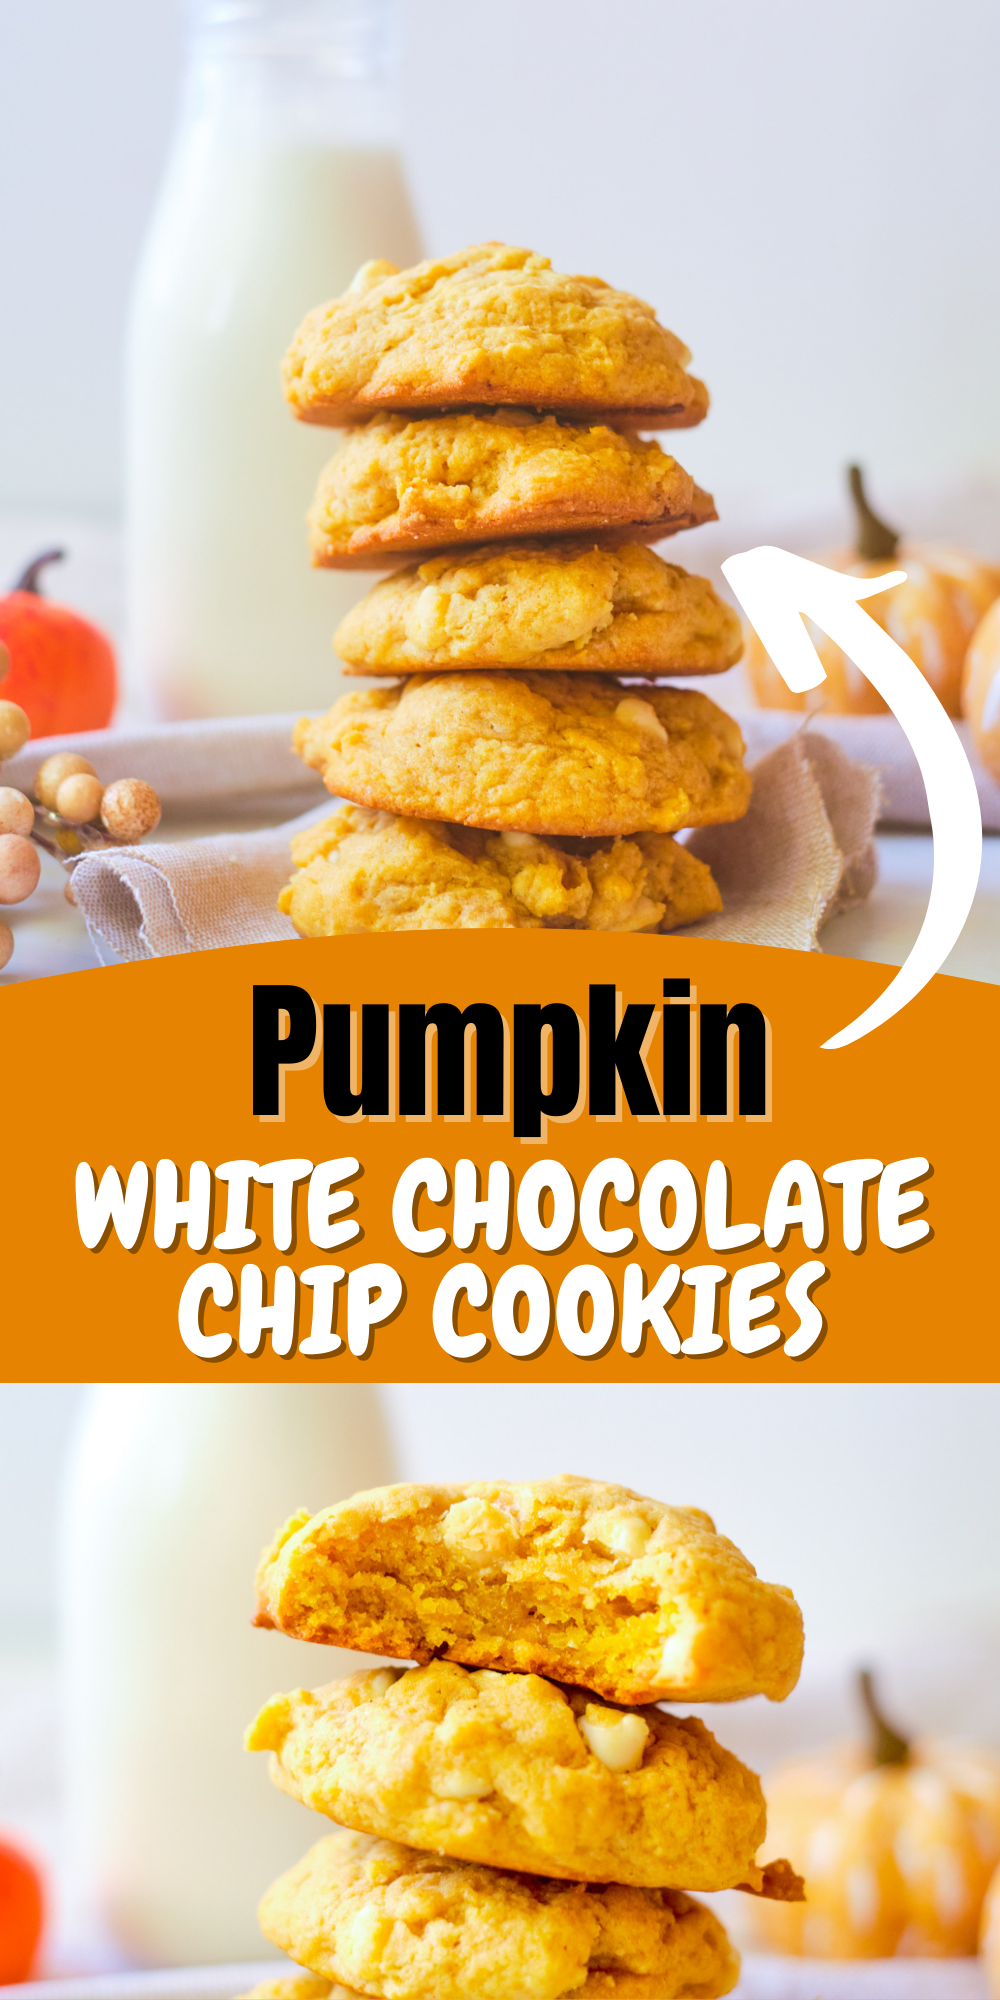 These Pumpkin White Chocolate Chip Cookies are simply perfect for fall and winter and are so yummy with a cup of java, tea or hot chocolate. 